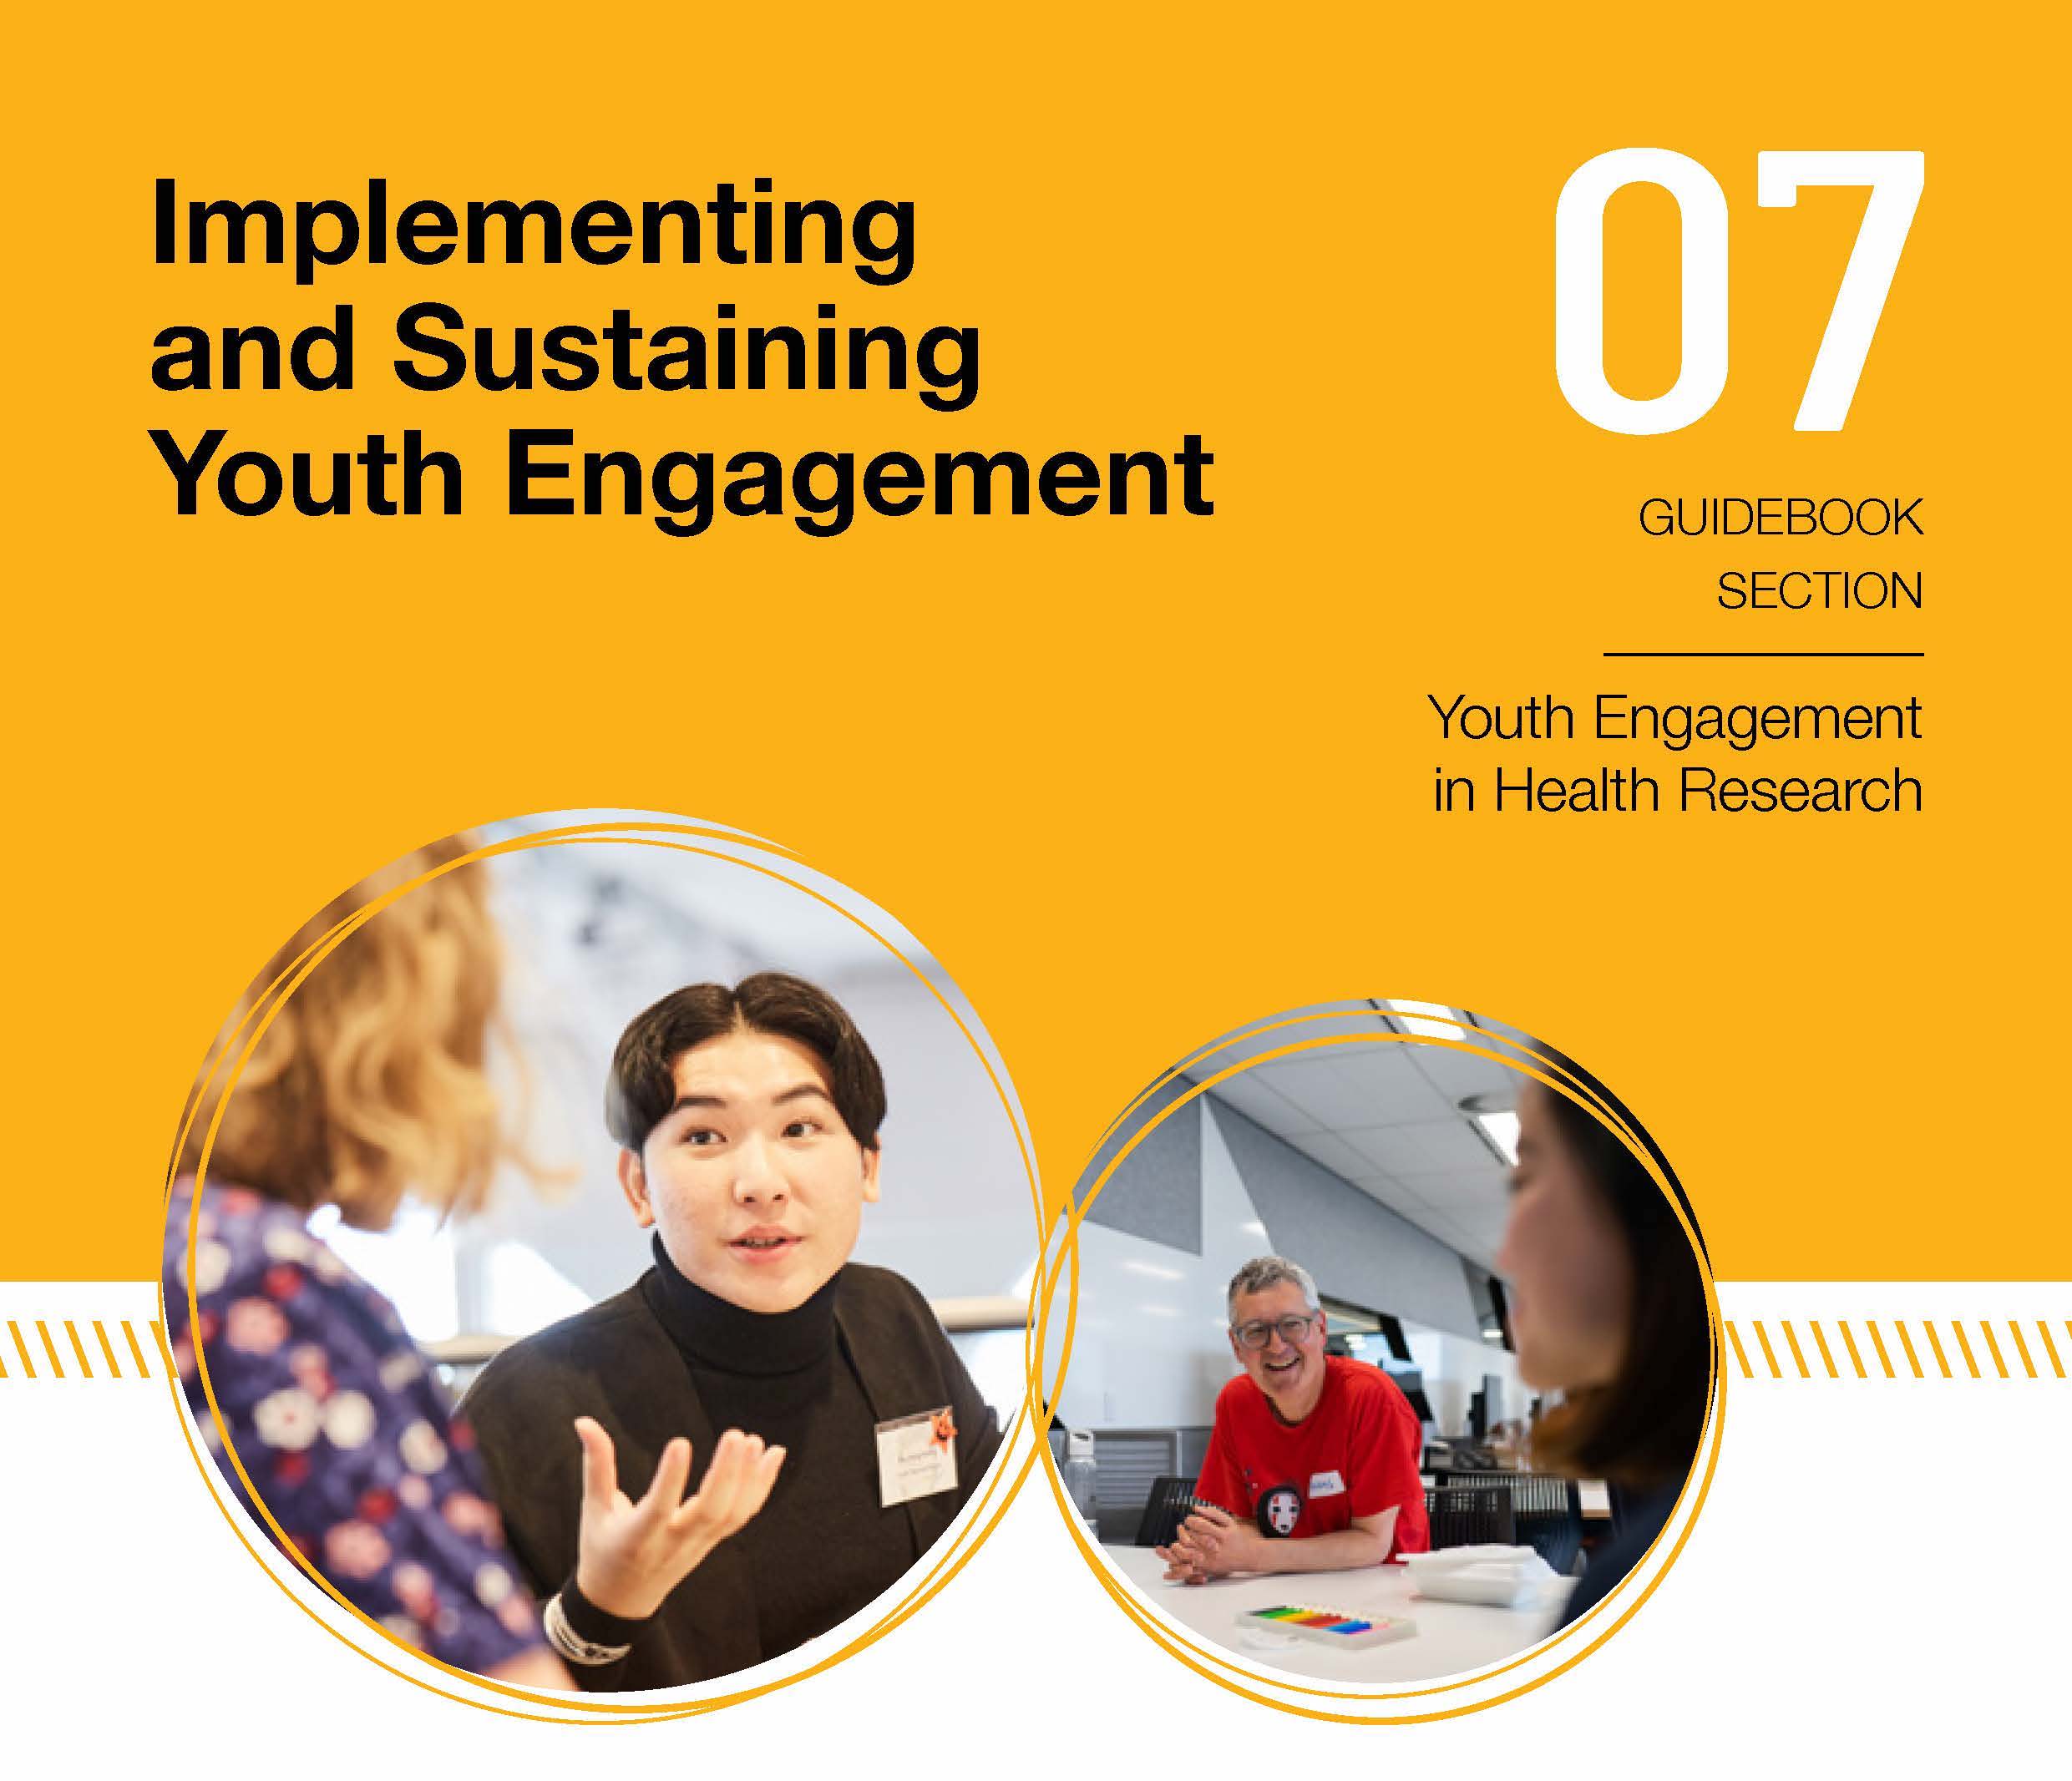 Implementing and Sustaining Youth Engagement